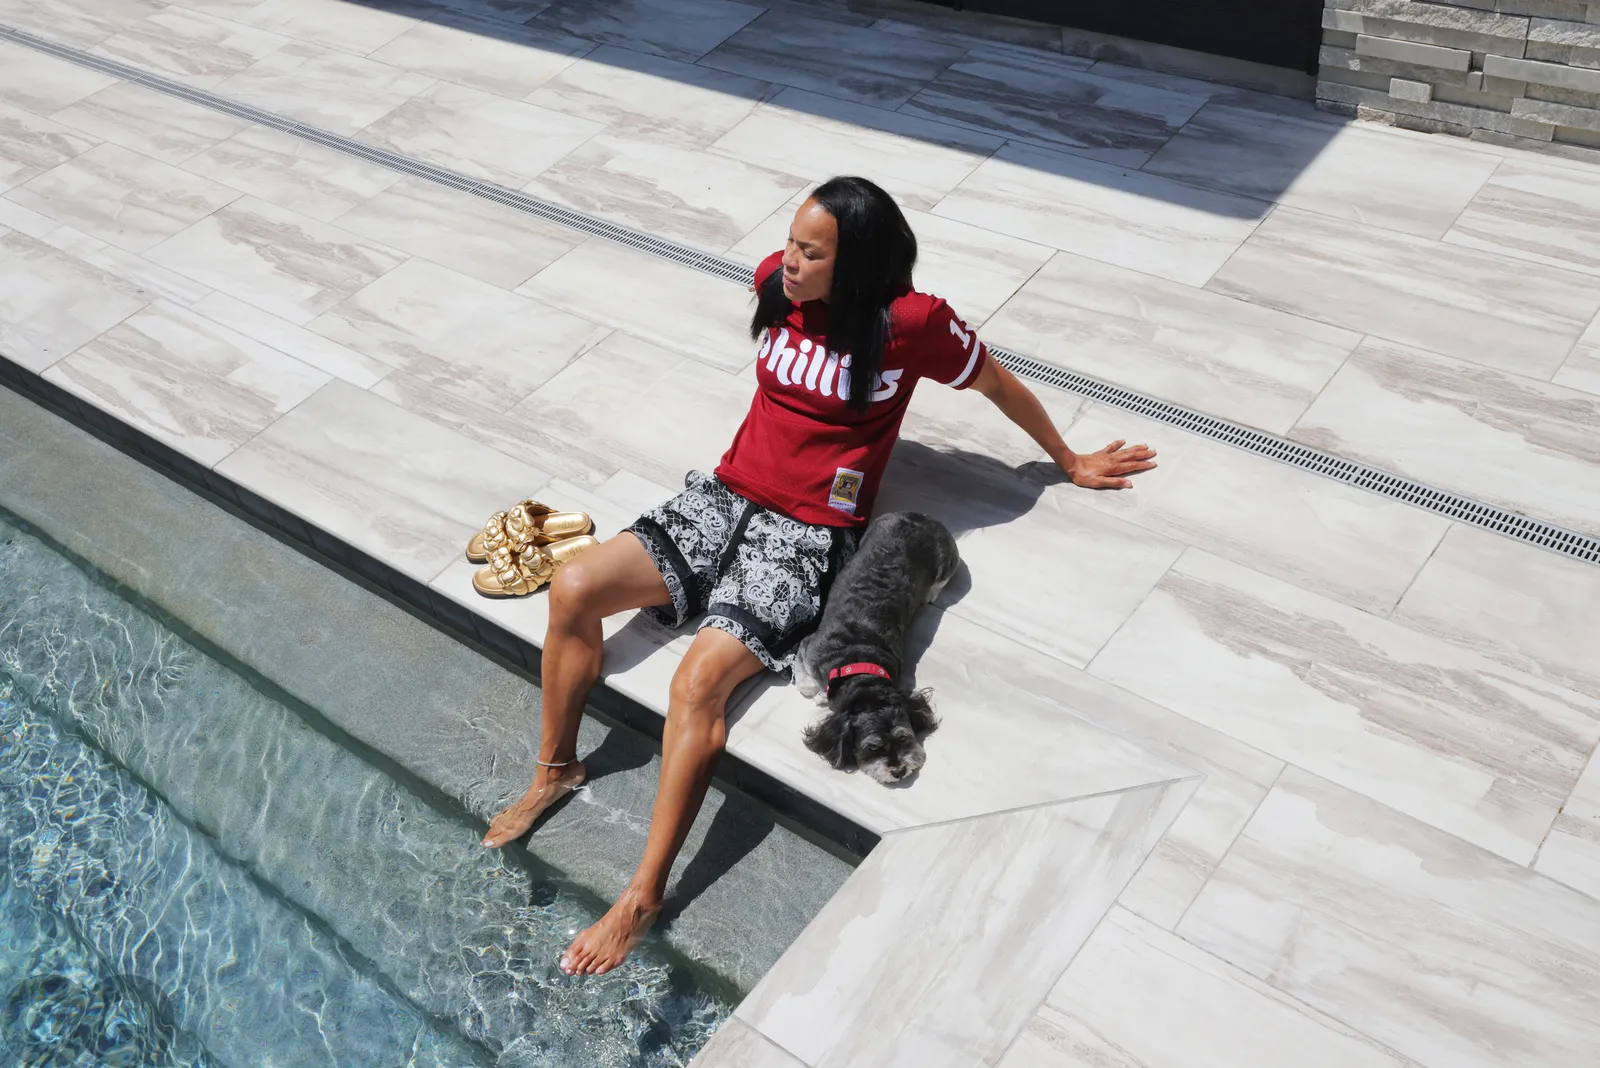 Where does Dawn Staley live? The South Carolina WBB coach has made Columbia, SC her permanent home. Pictured: Dawn Staley with her dog, Champ, sitting by the pool at her house